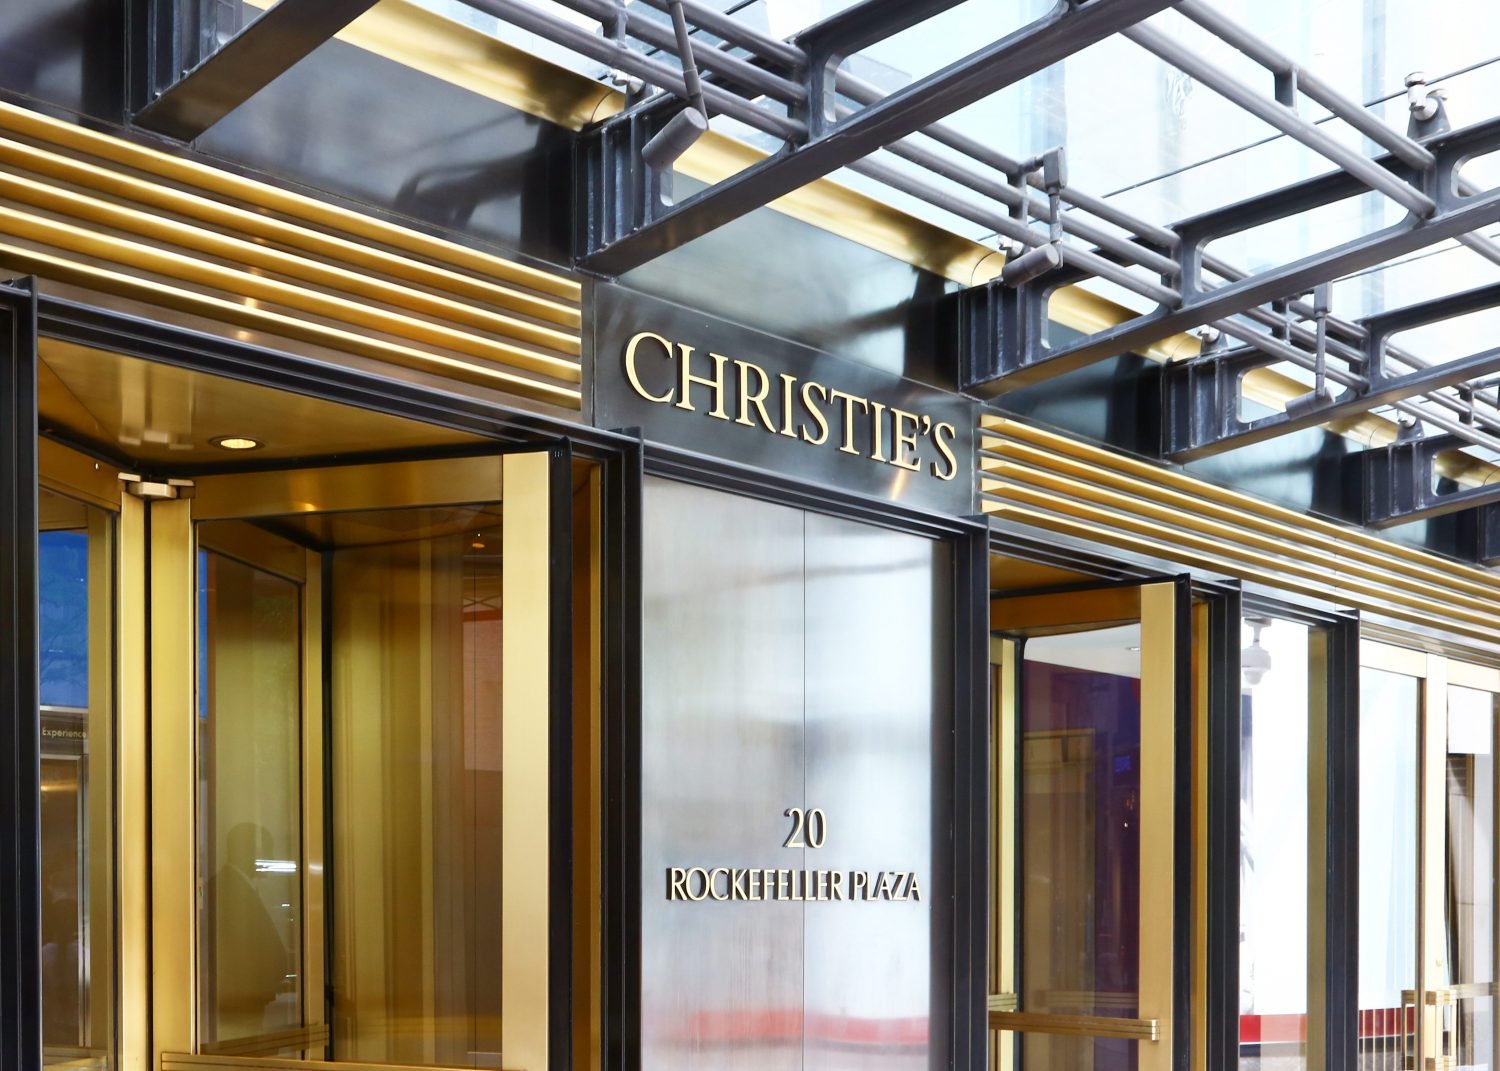 Leading Auction House Christie’s To Record Art Sales On A Blockchain